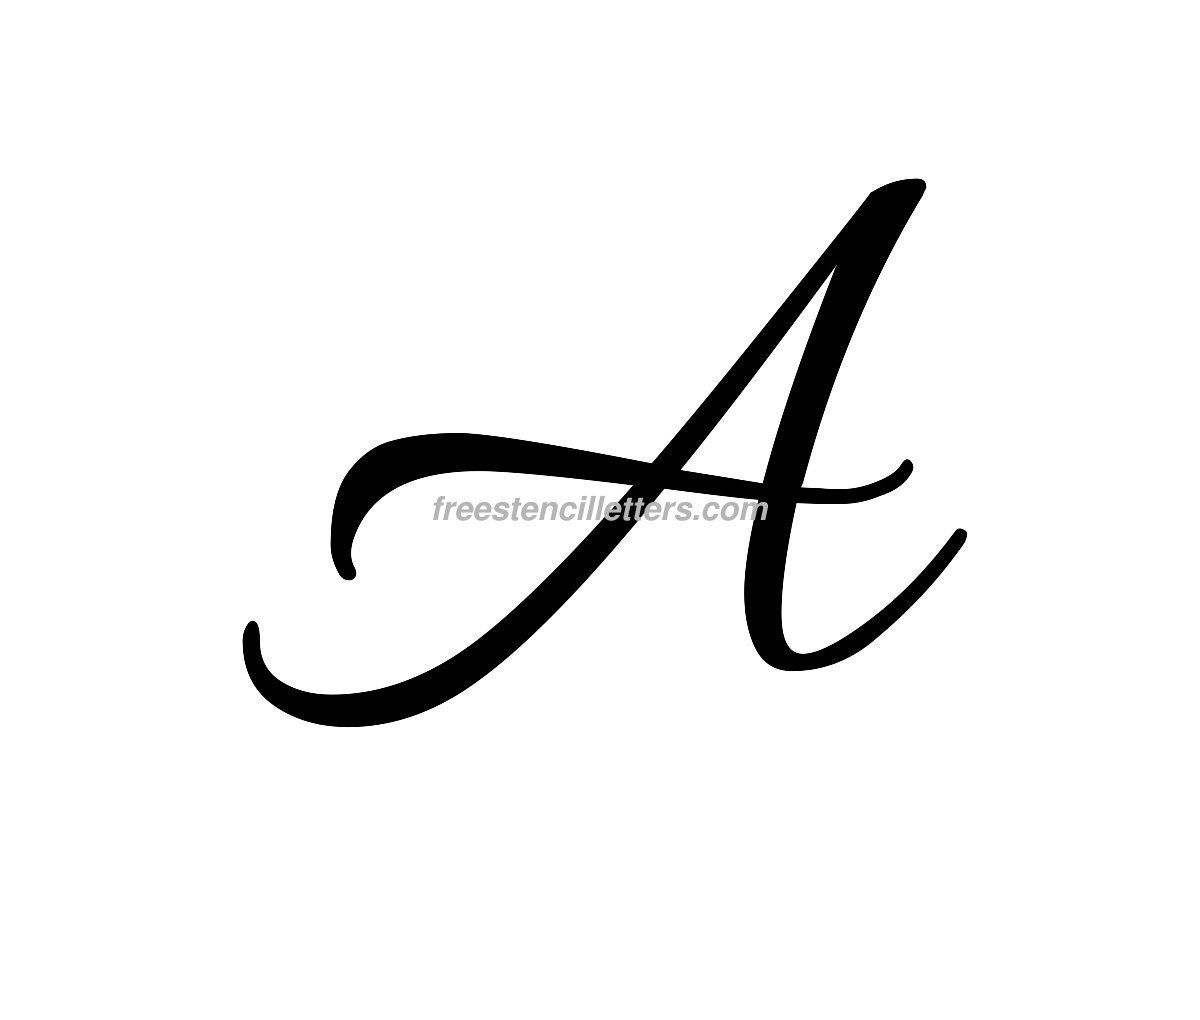 Cursive Letters Archives Free Stencil Letters Many people approach cursive writing as a way to be more creative and use handwriting in more situations. free stencil letters